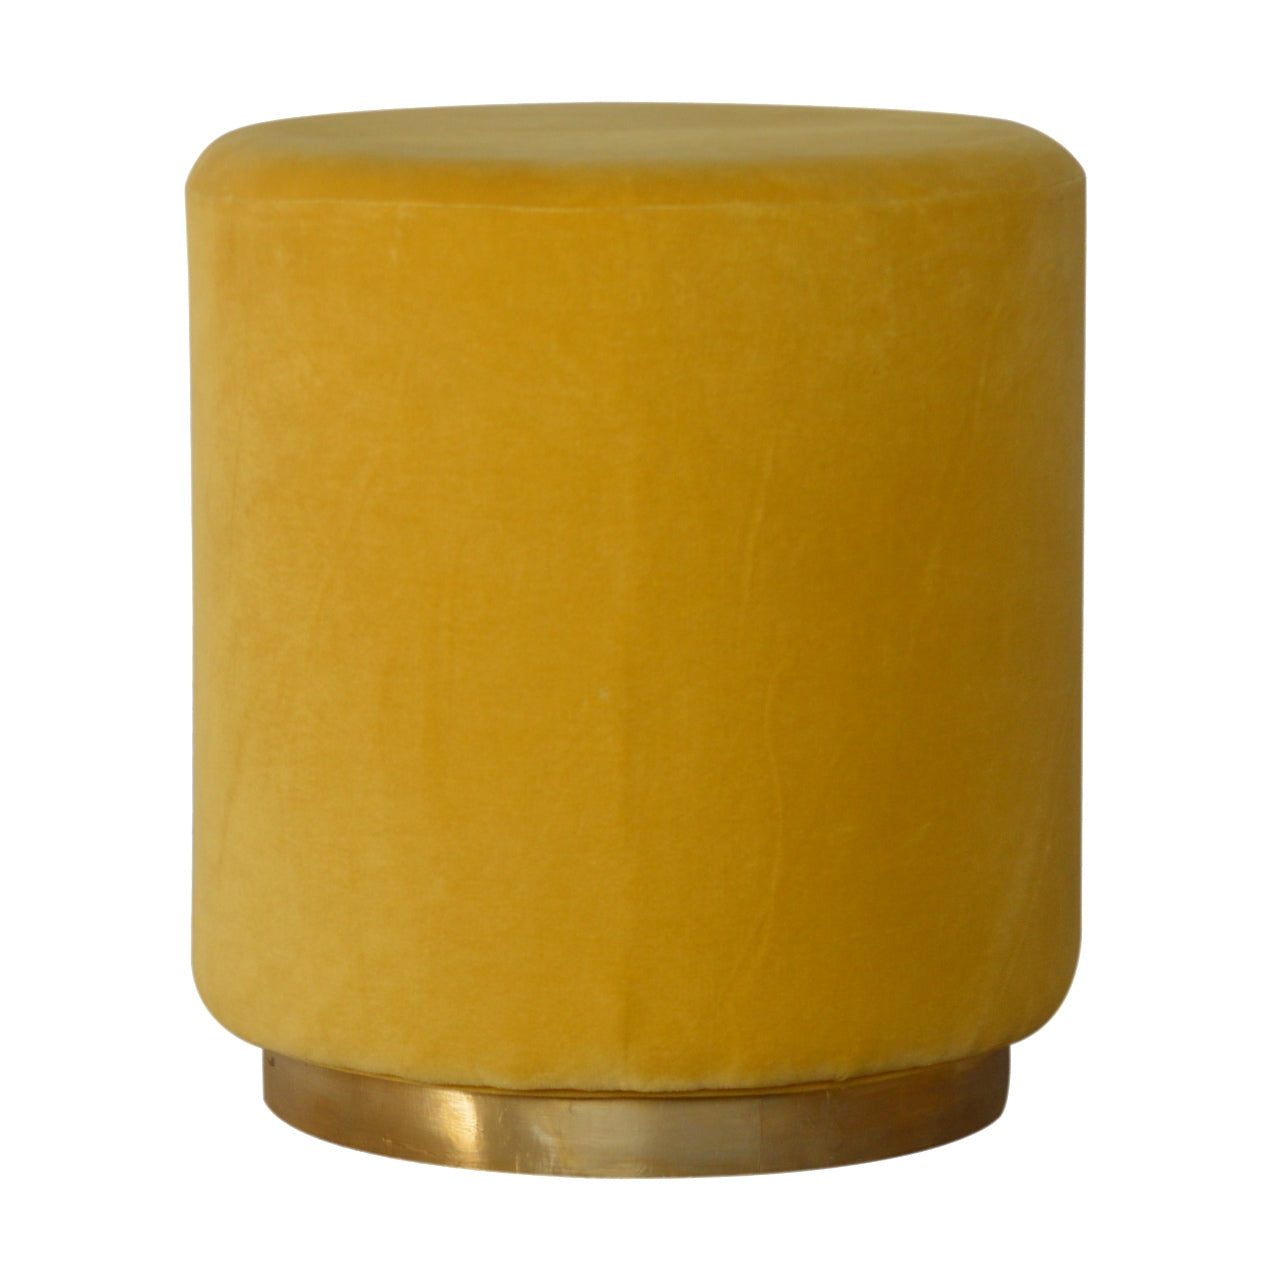 View IN818 Mustard Velvet Footstool with Gold Base information